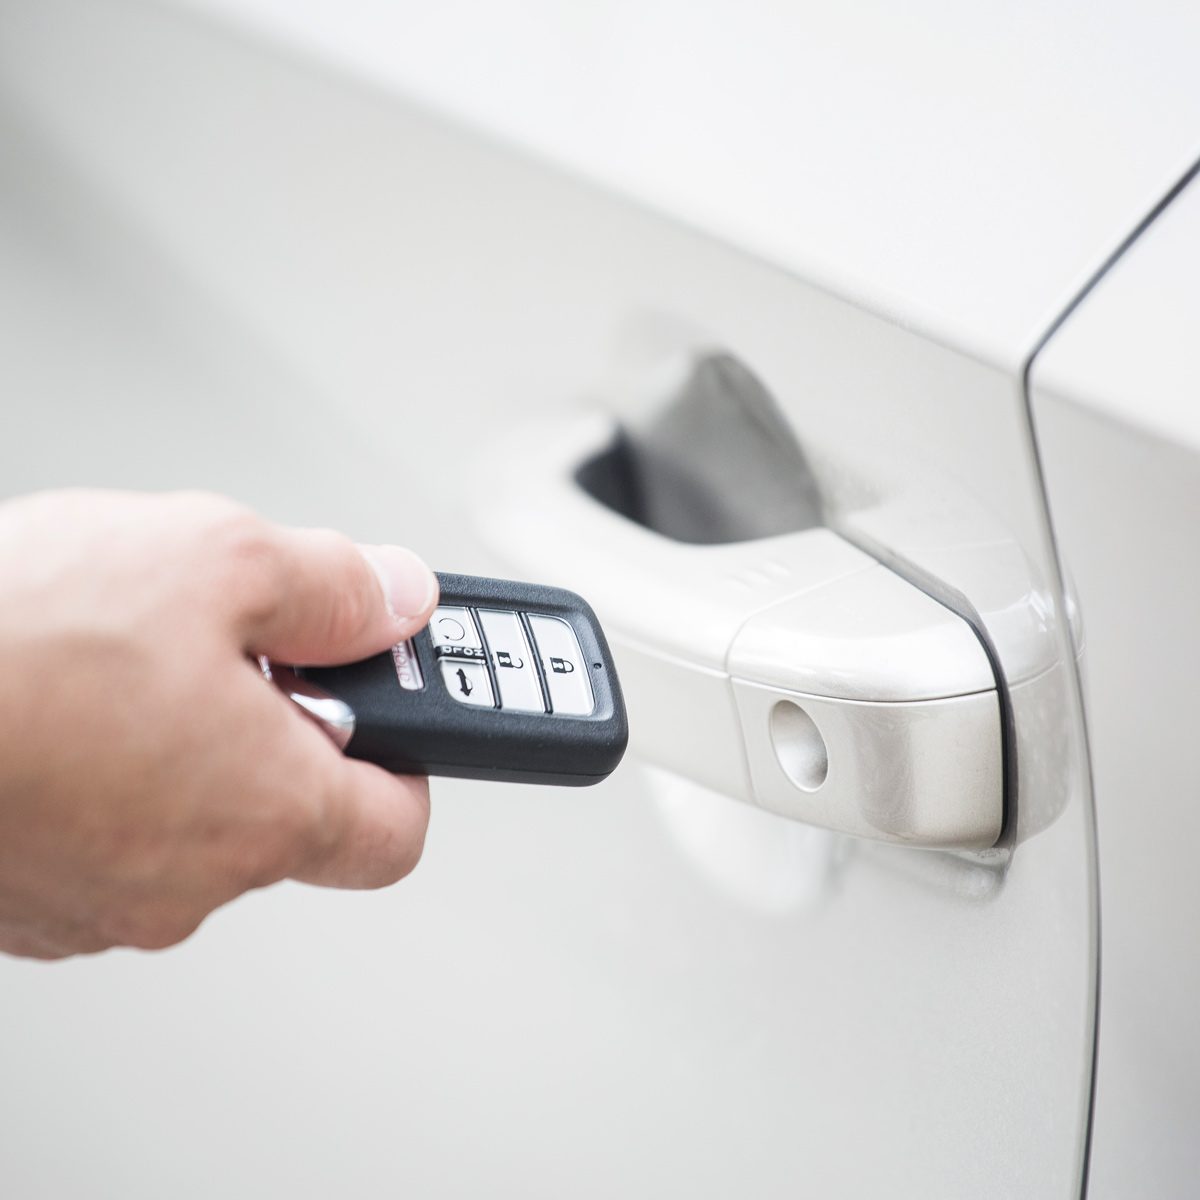 Key fob security dangers and how to prevent becoming a target